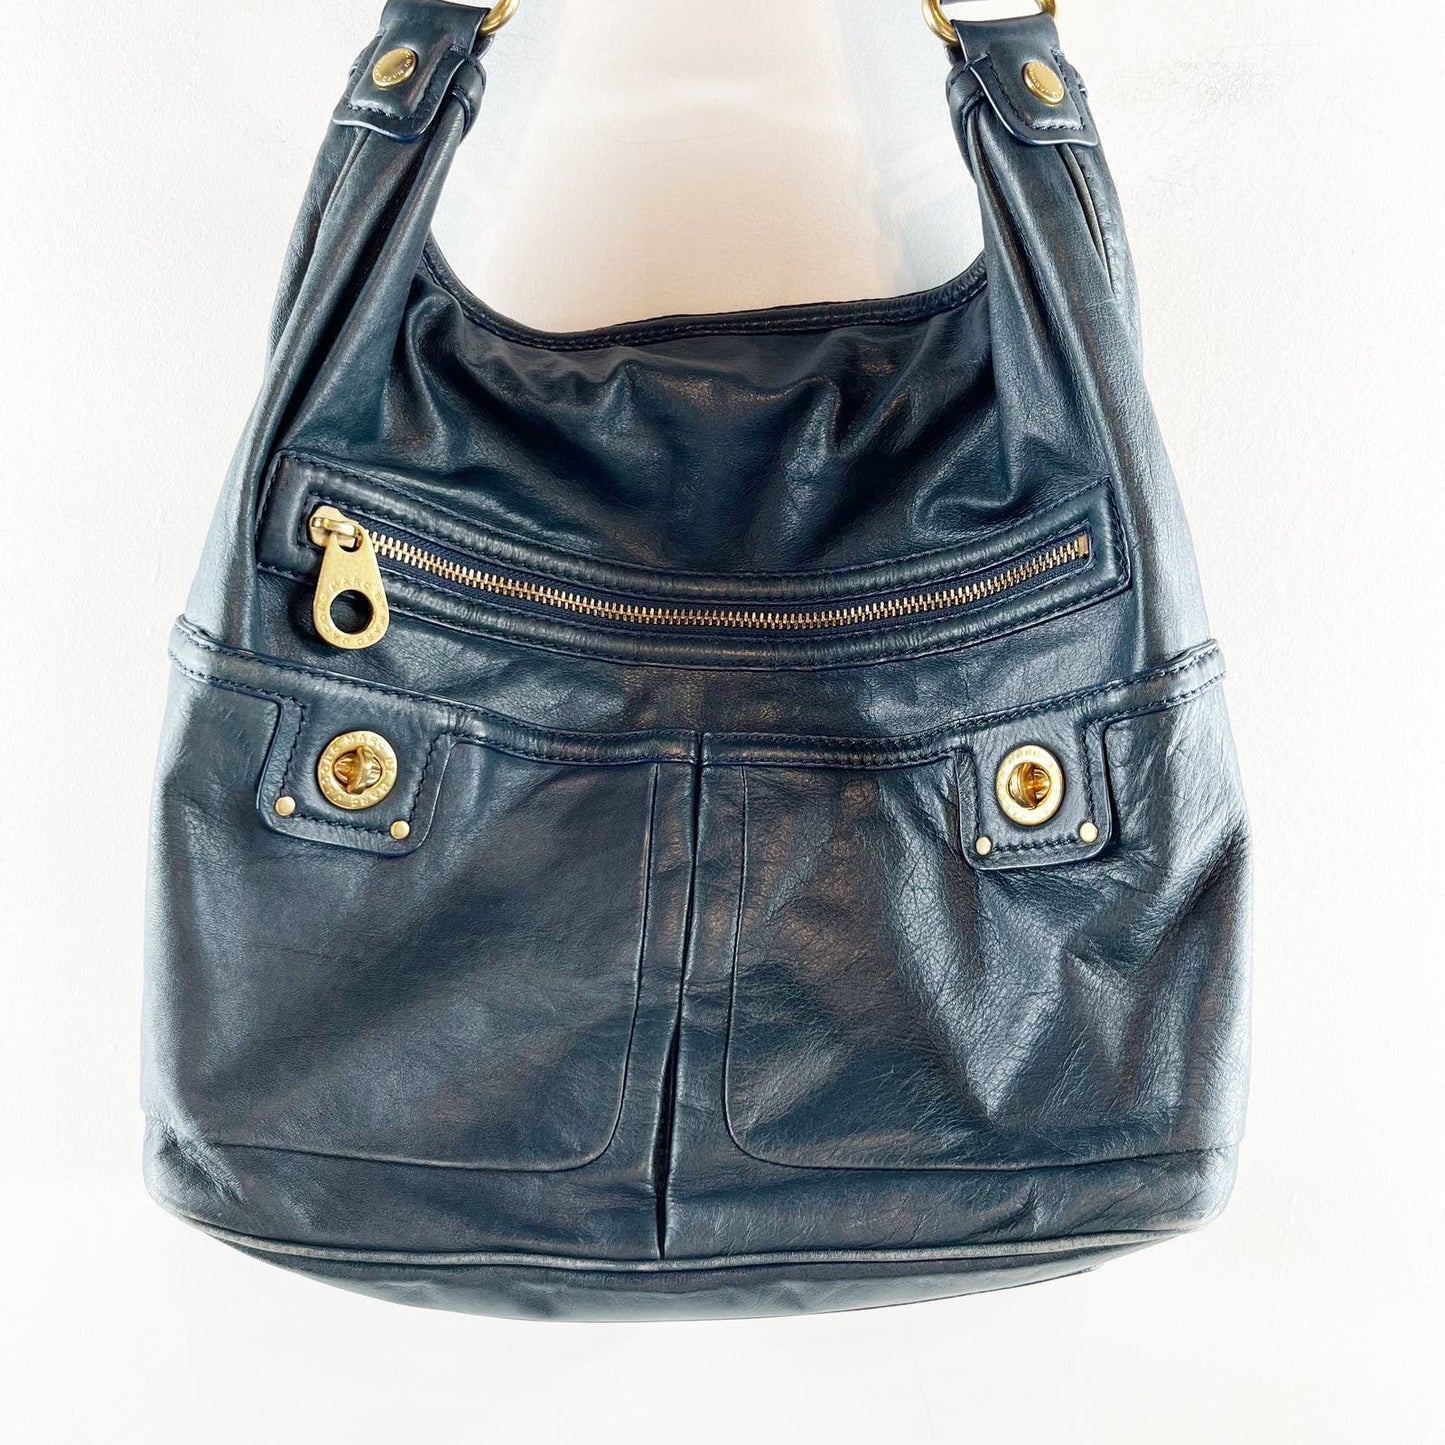 Marc Jacobs Totally Turnlock Faridah Leather Hobo Purse Black